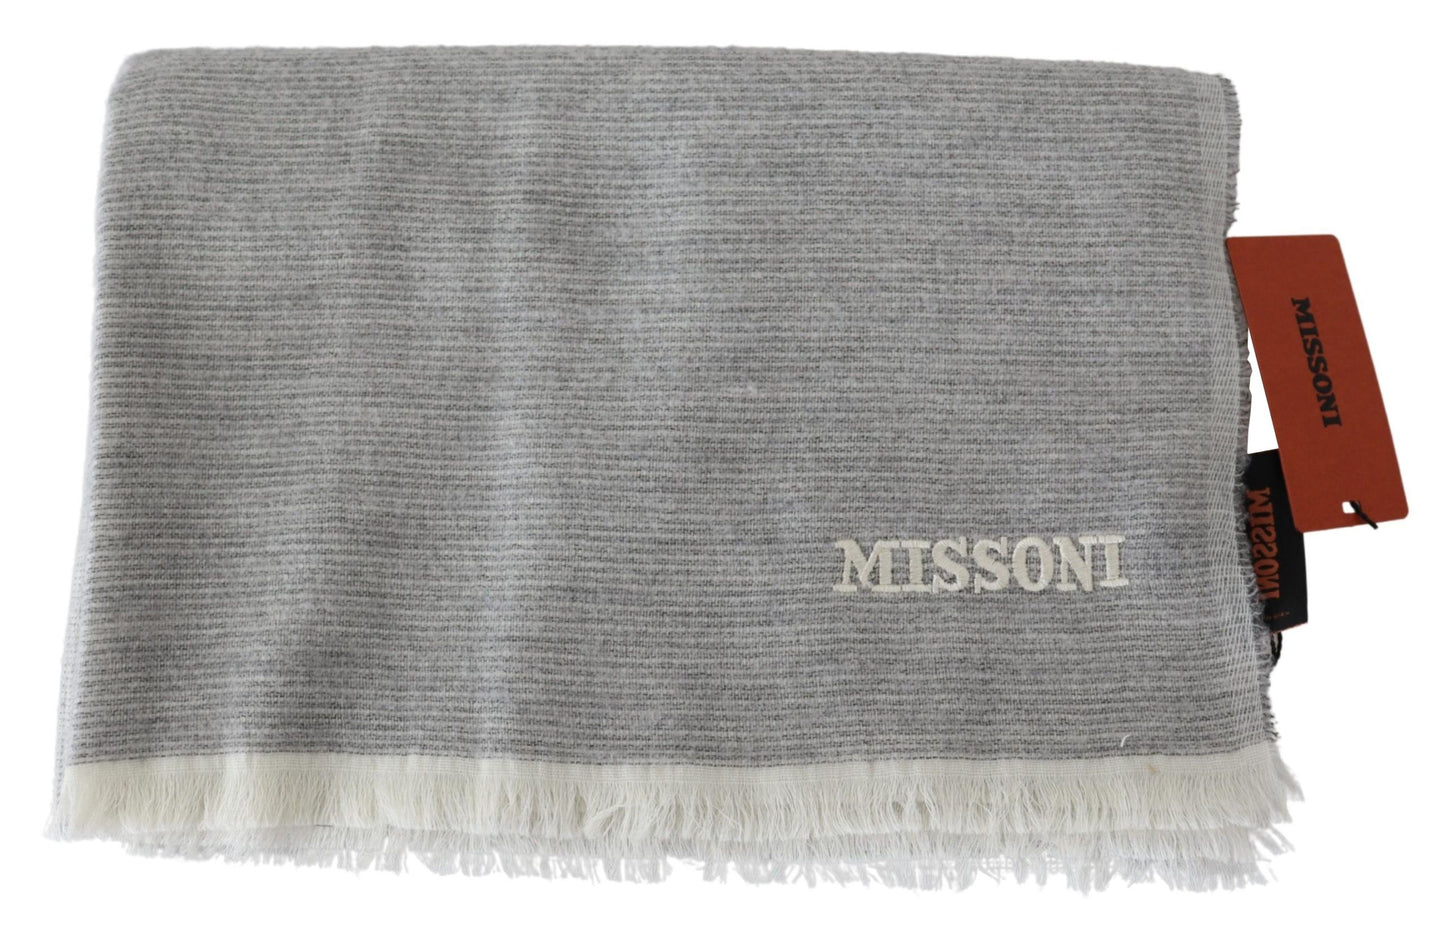 Elegant Beige Wool Scarf with Embroidery Detail